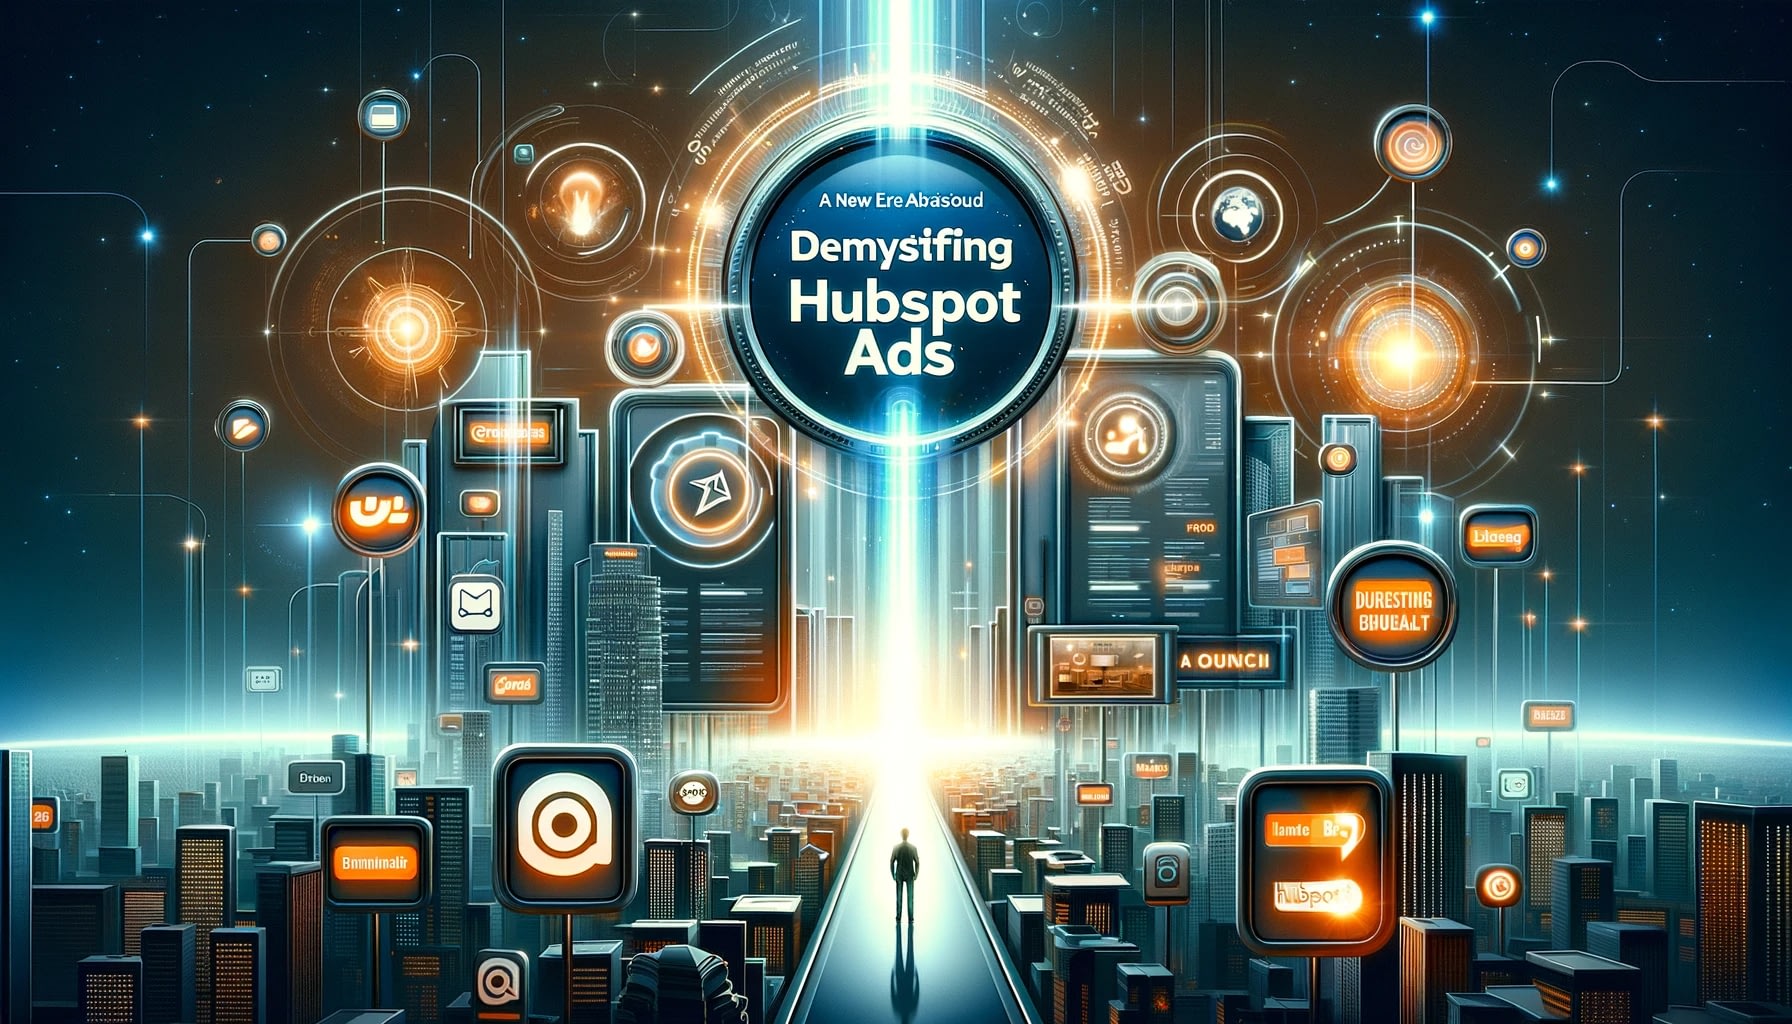 Demystifying HubSpot Ads With Your Hubspot Account